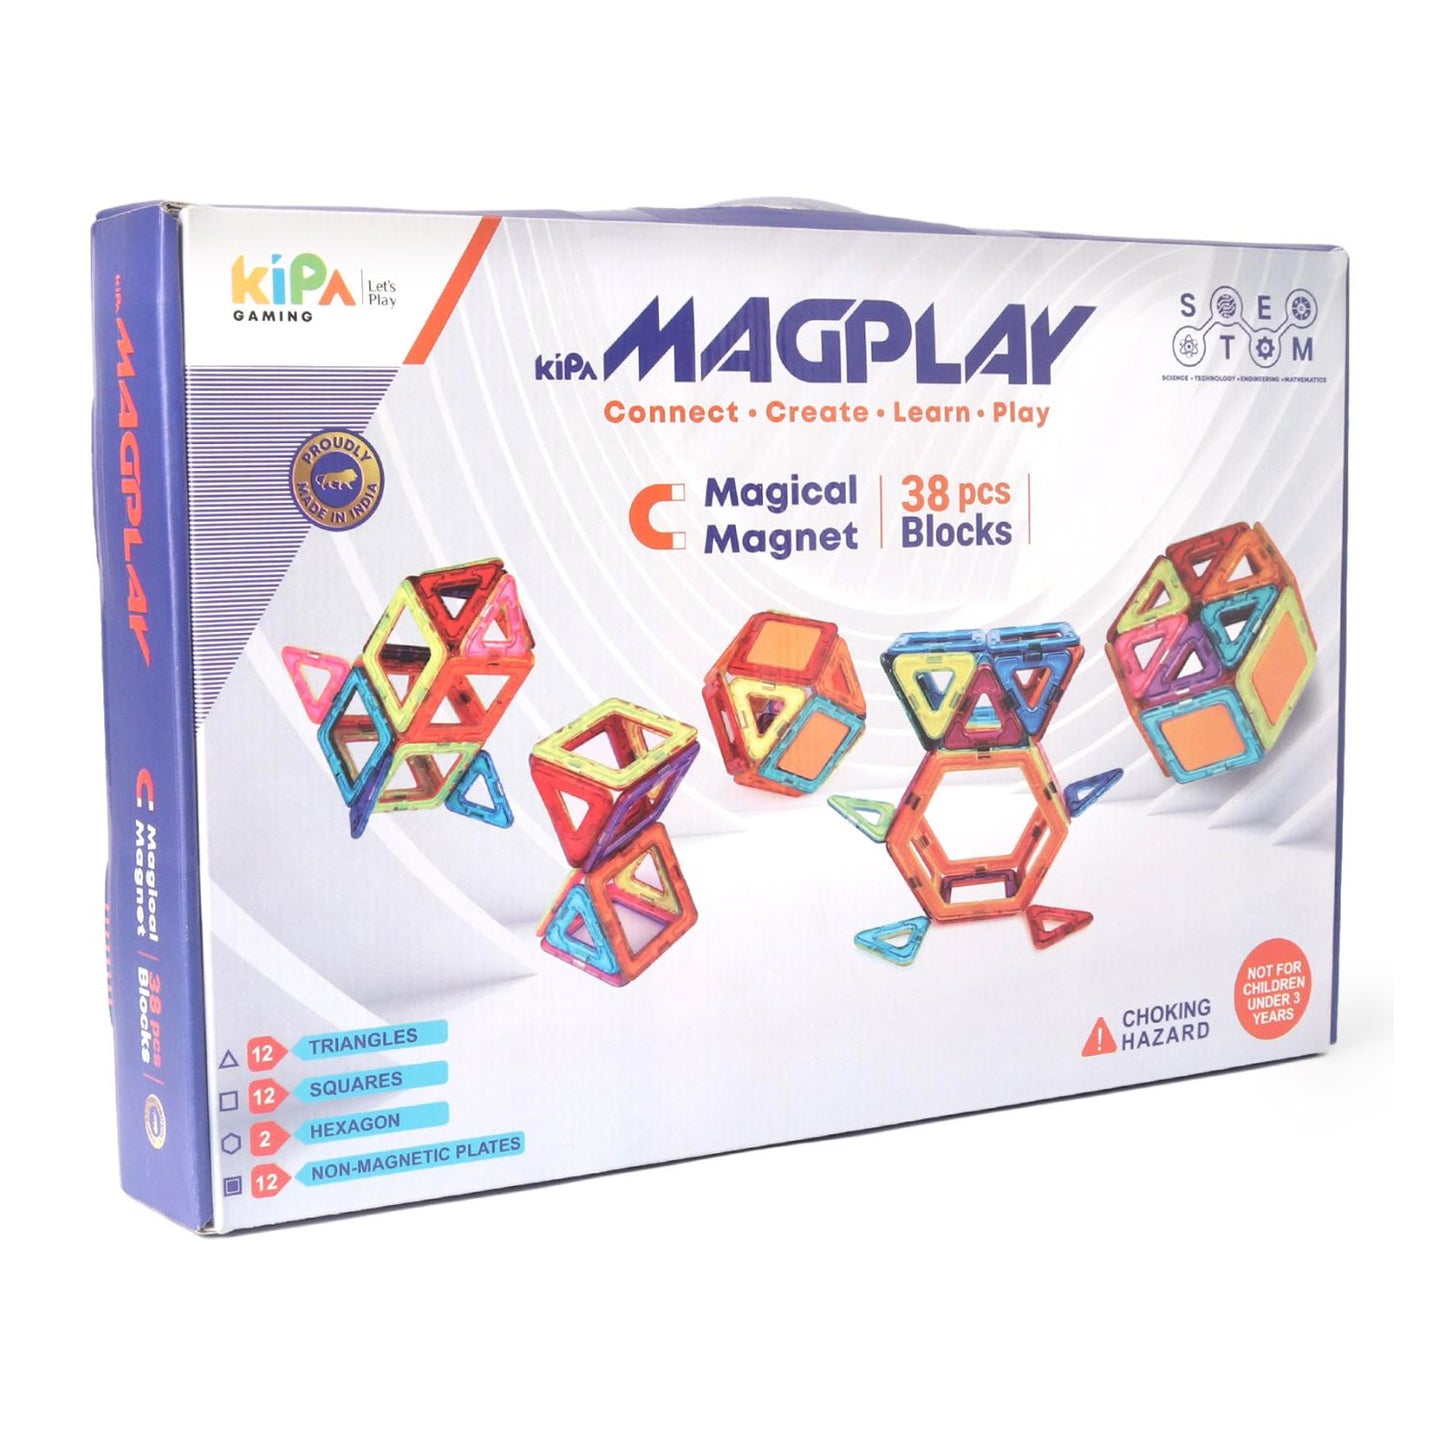 Kipa Magplay Magical Magnetic Blocks 38 pcs STEM Game Puzzle: A Developmental & Learning Tool for Kids- Multicolor